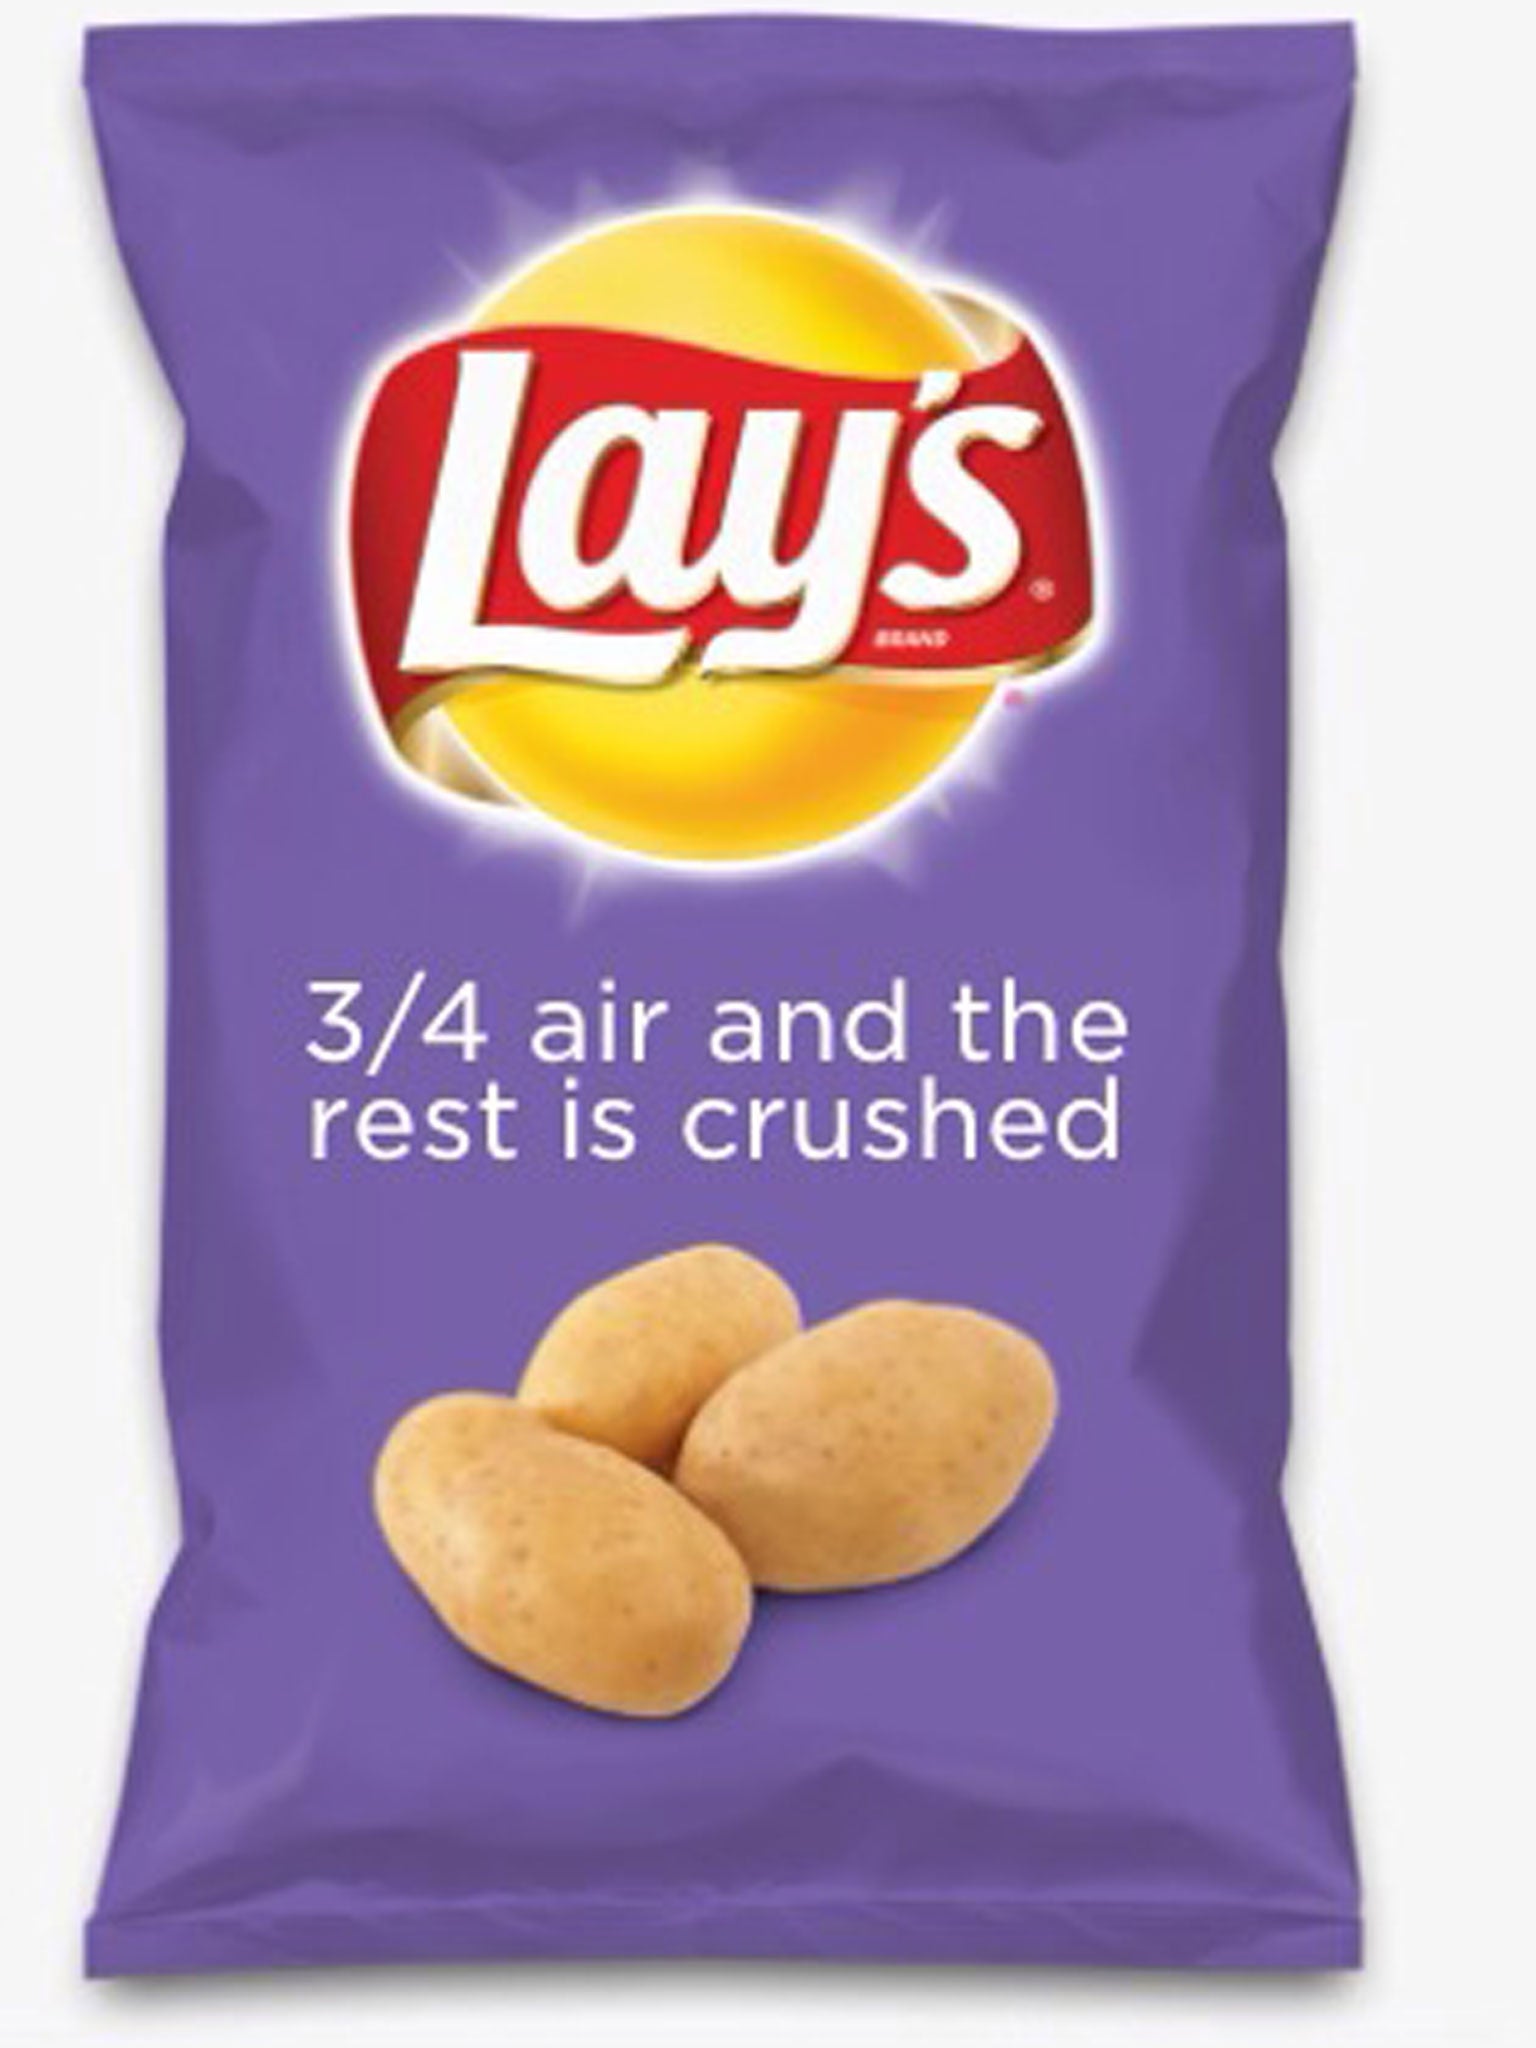 A combination suggested for the Lays 'do us a flavor' competition